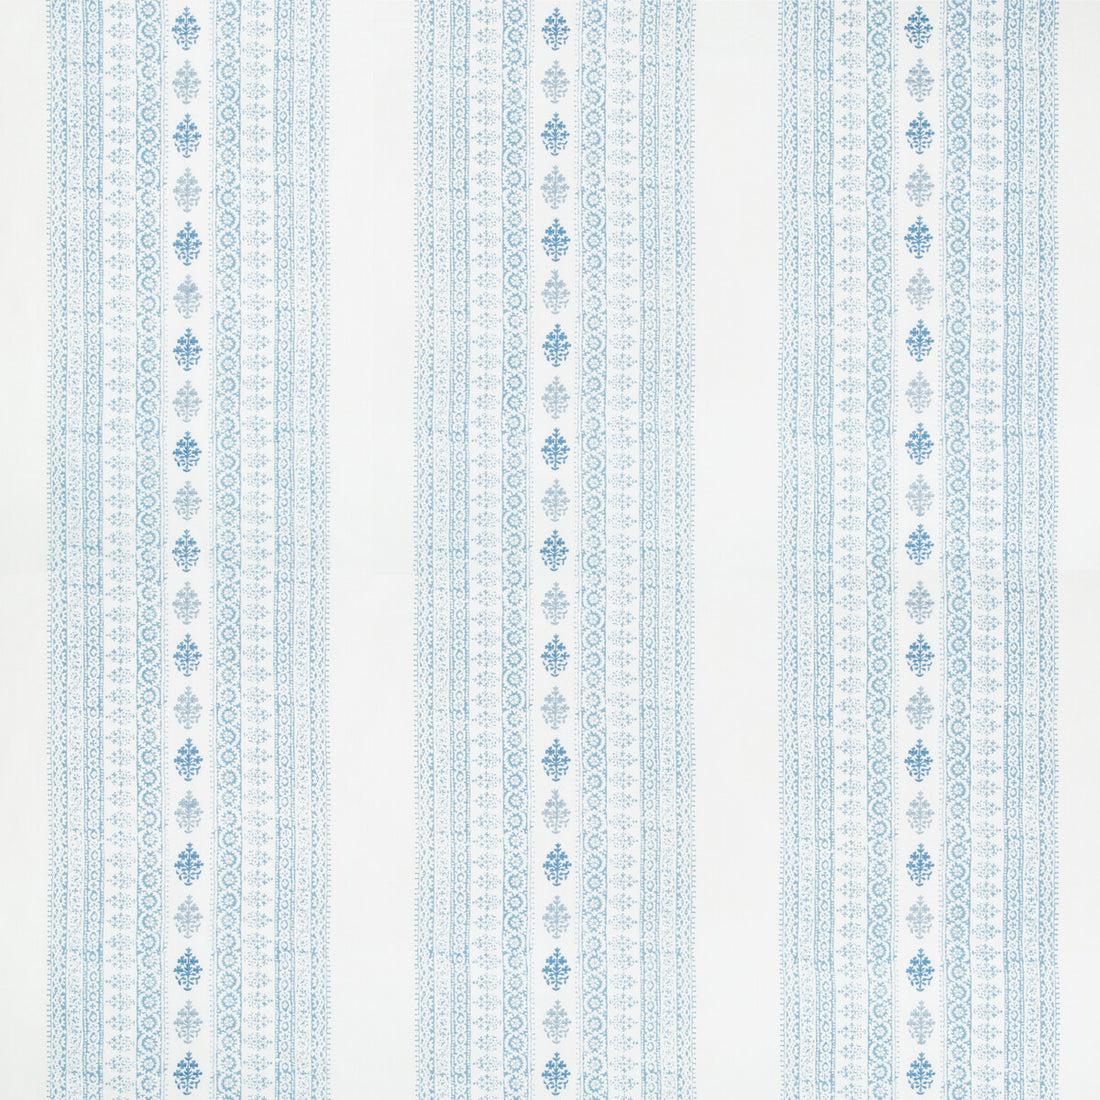 Seacliffe Print fabric in sky color - pattern 2017168.5.0 - by Lee Jofa in the Westport collection